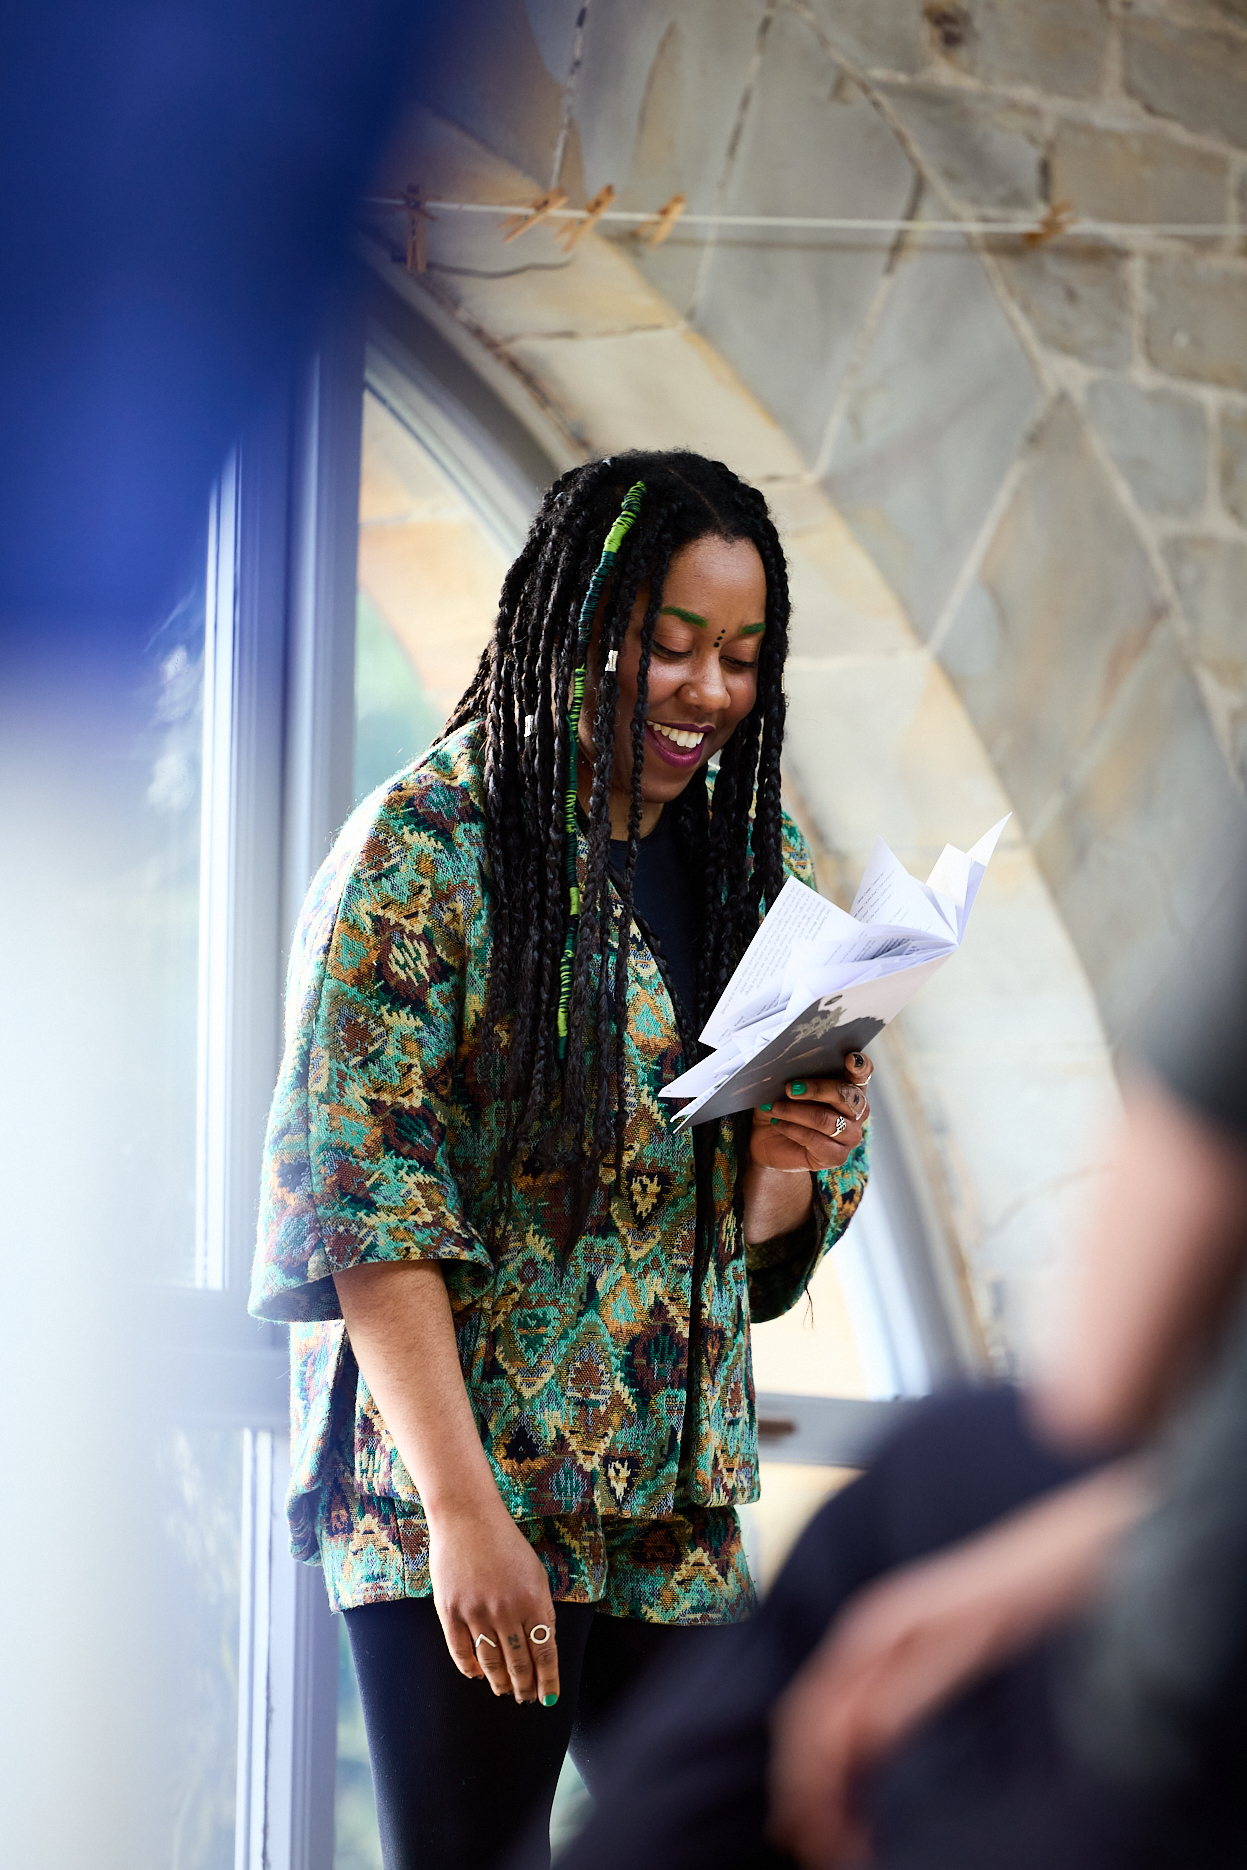 A black woman with braided hair smiling while reading from a booklet